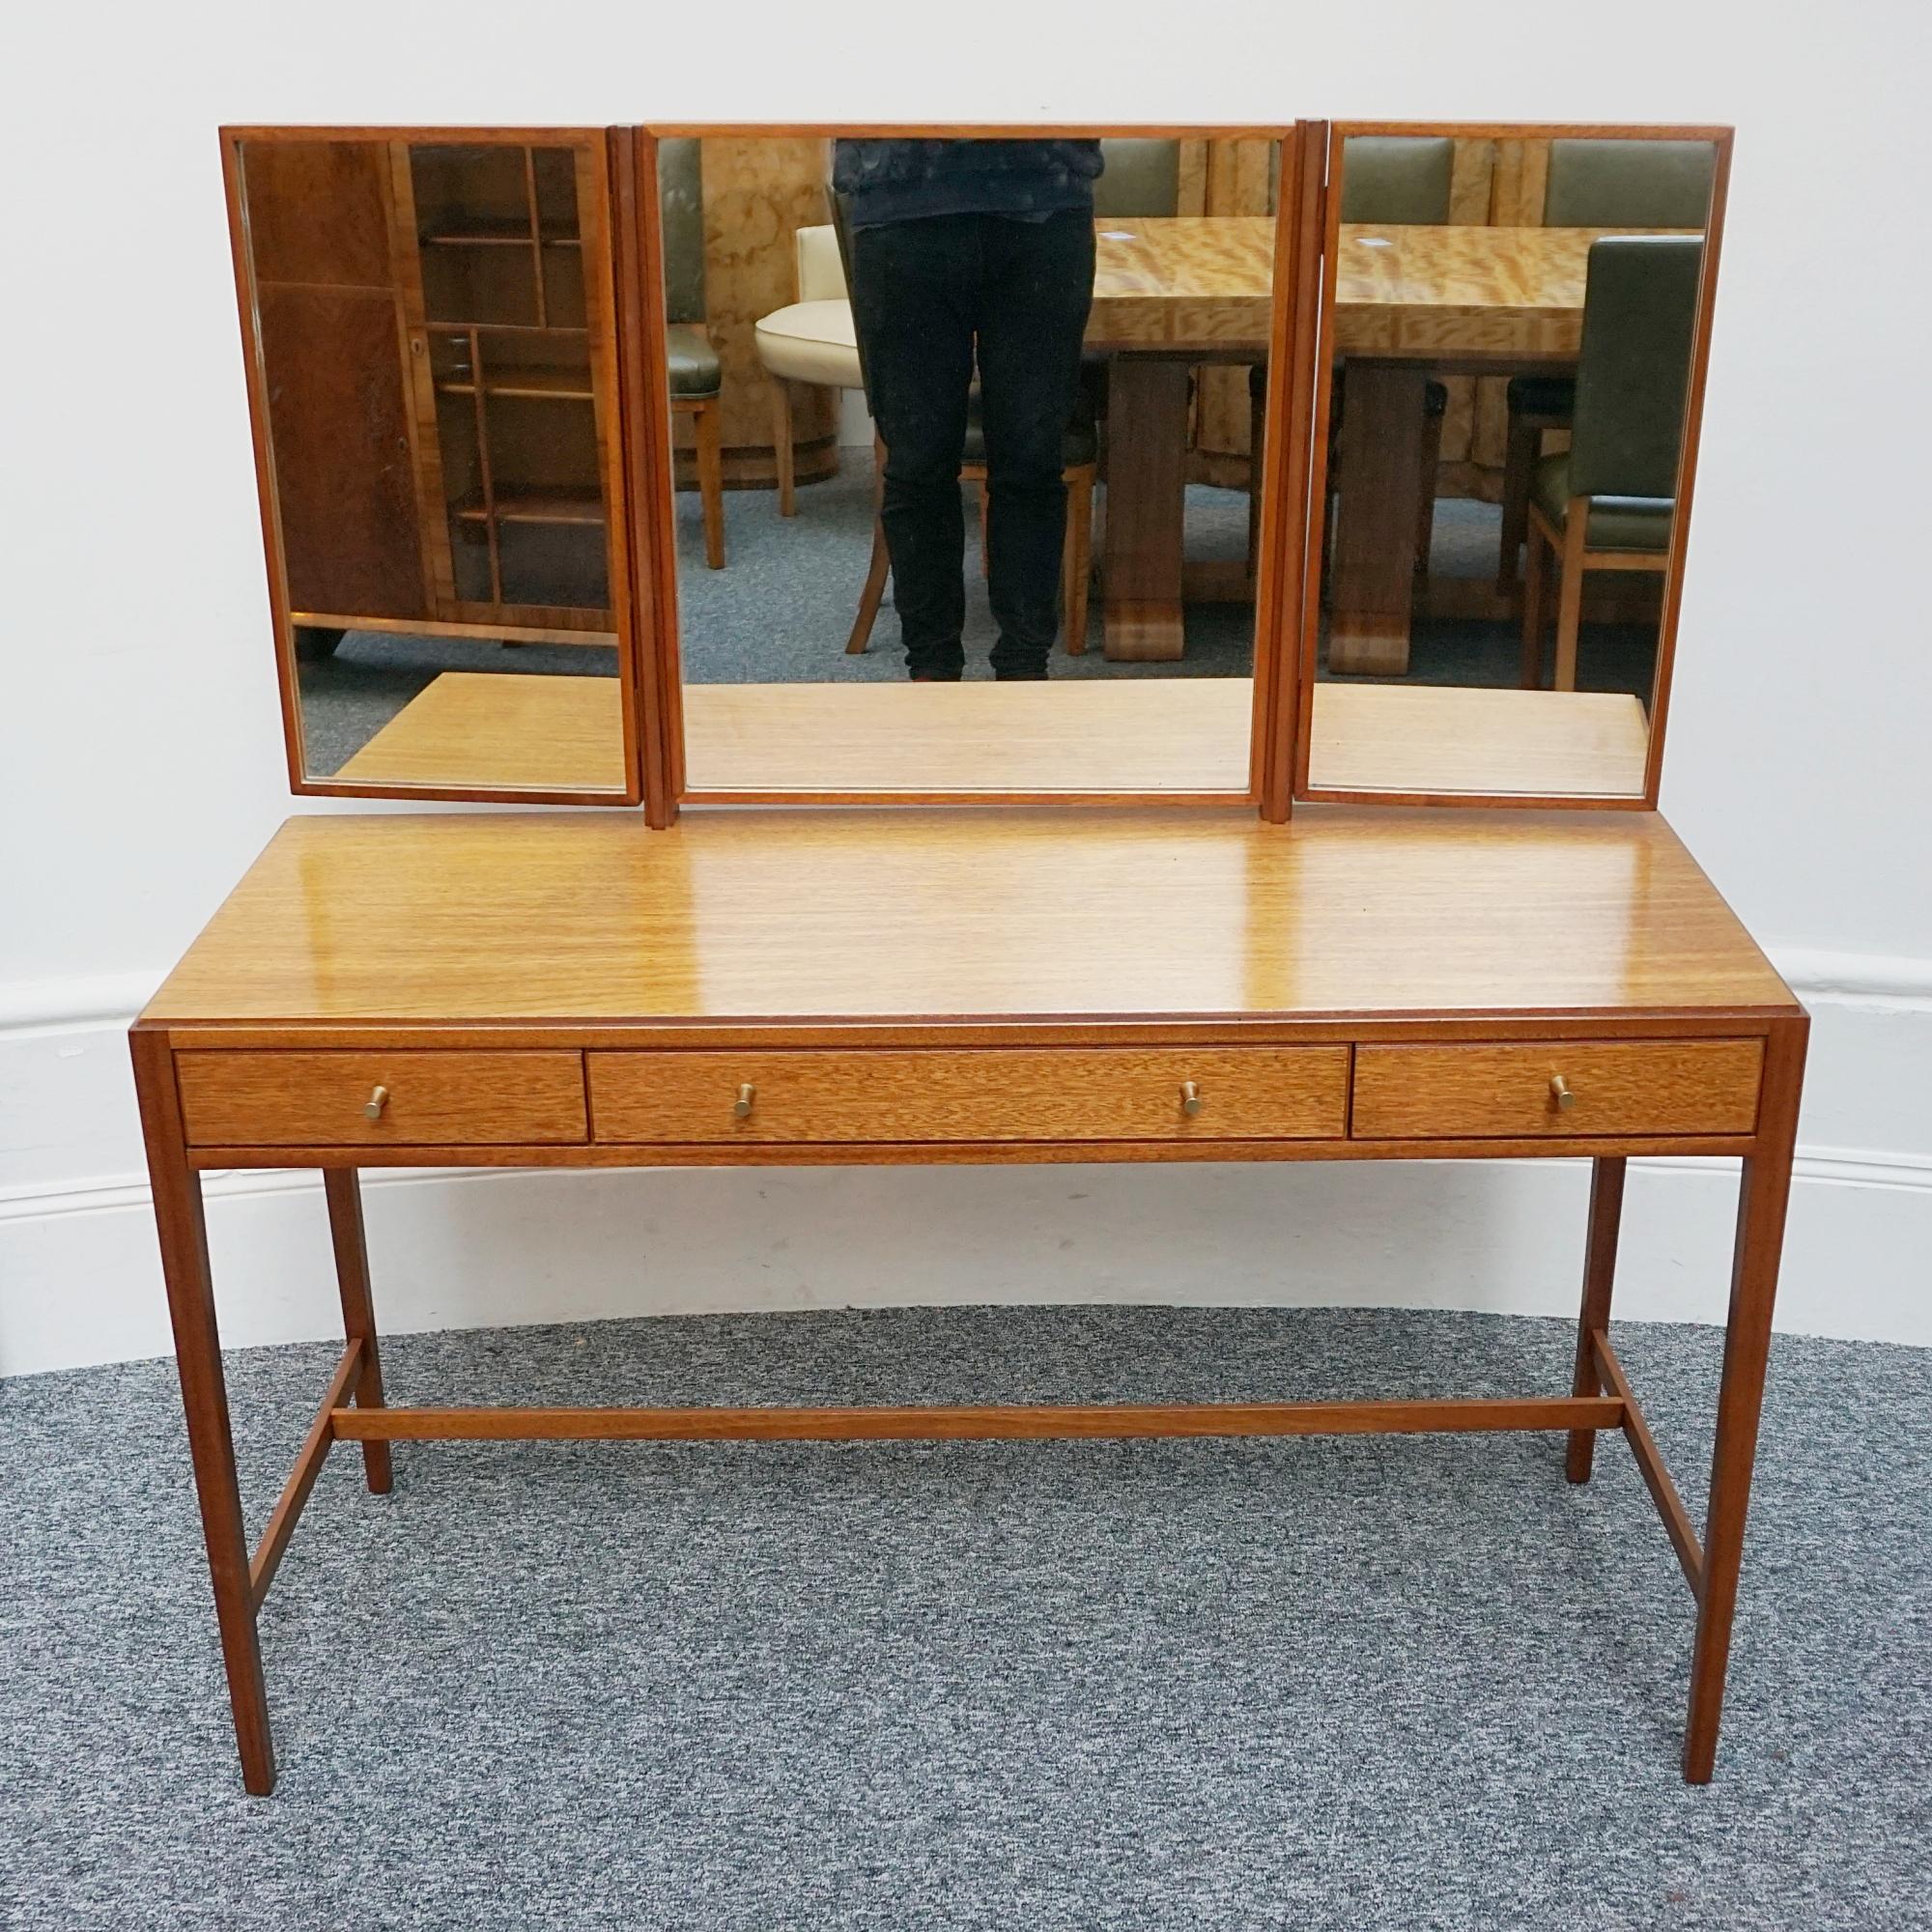 A Mid 20th century dressing table by designed by Neville Ward and Frank Austin for Loughborough Furniture, and retailed by Heal's of London. Figured olive walnut throughout with original metal handles. 

Dimensions: H 72cm with mirror 130cm W122cm D